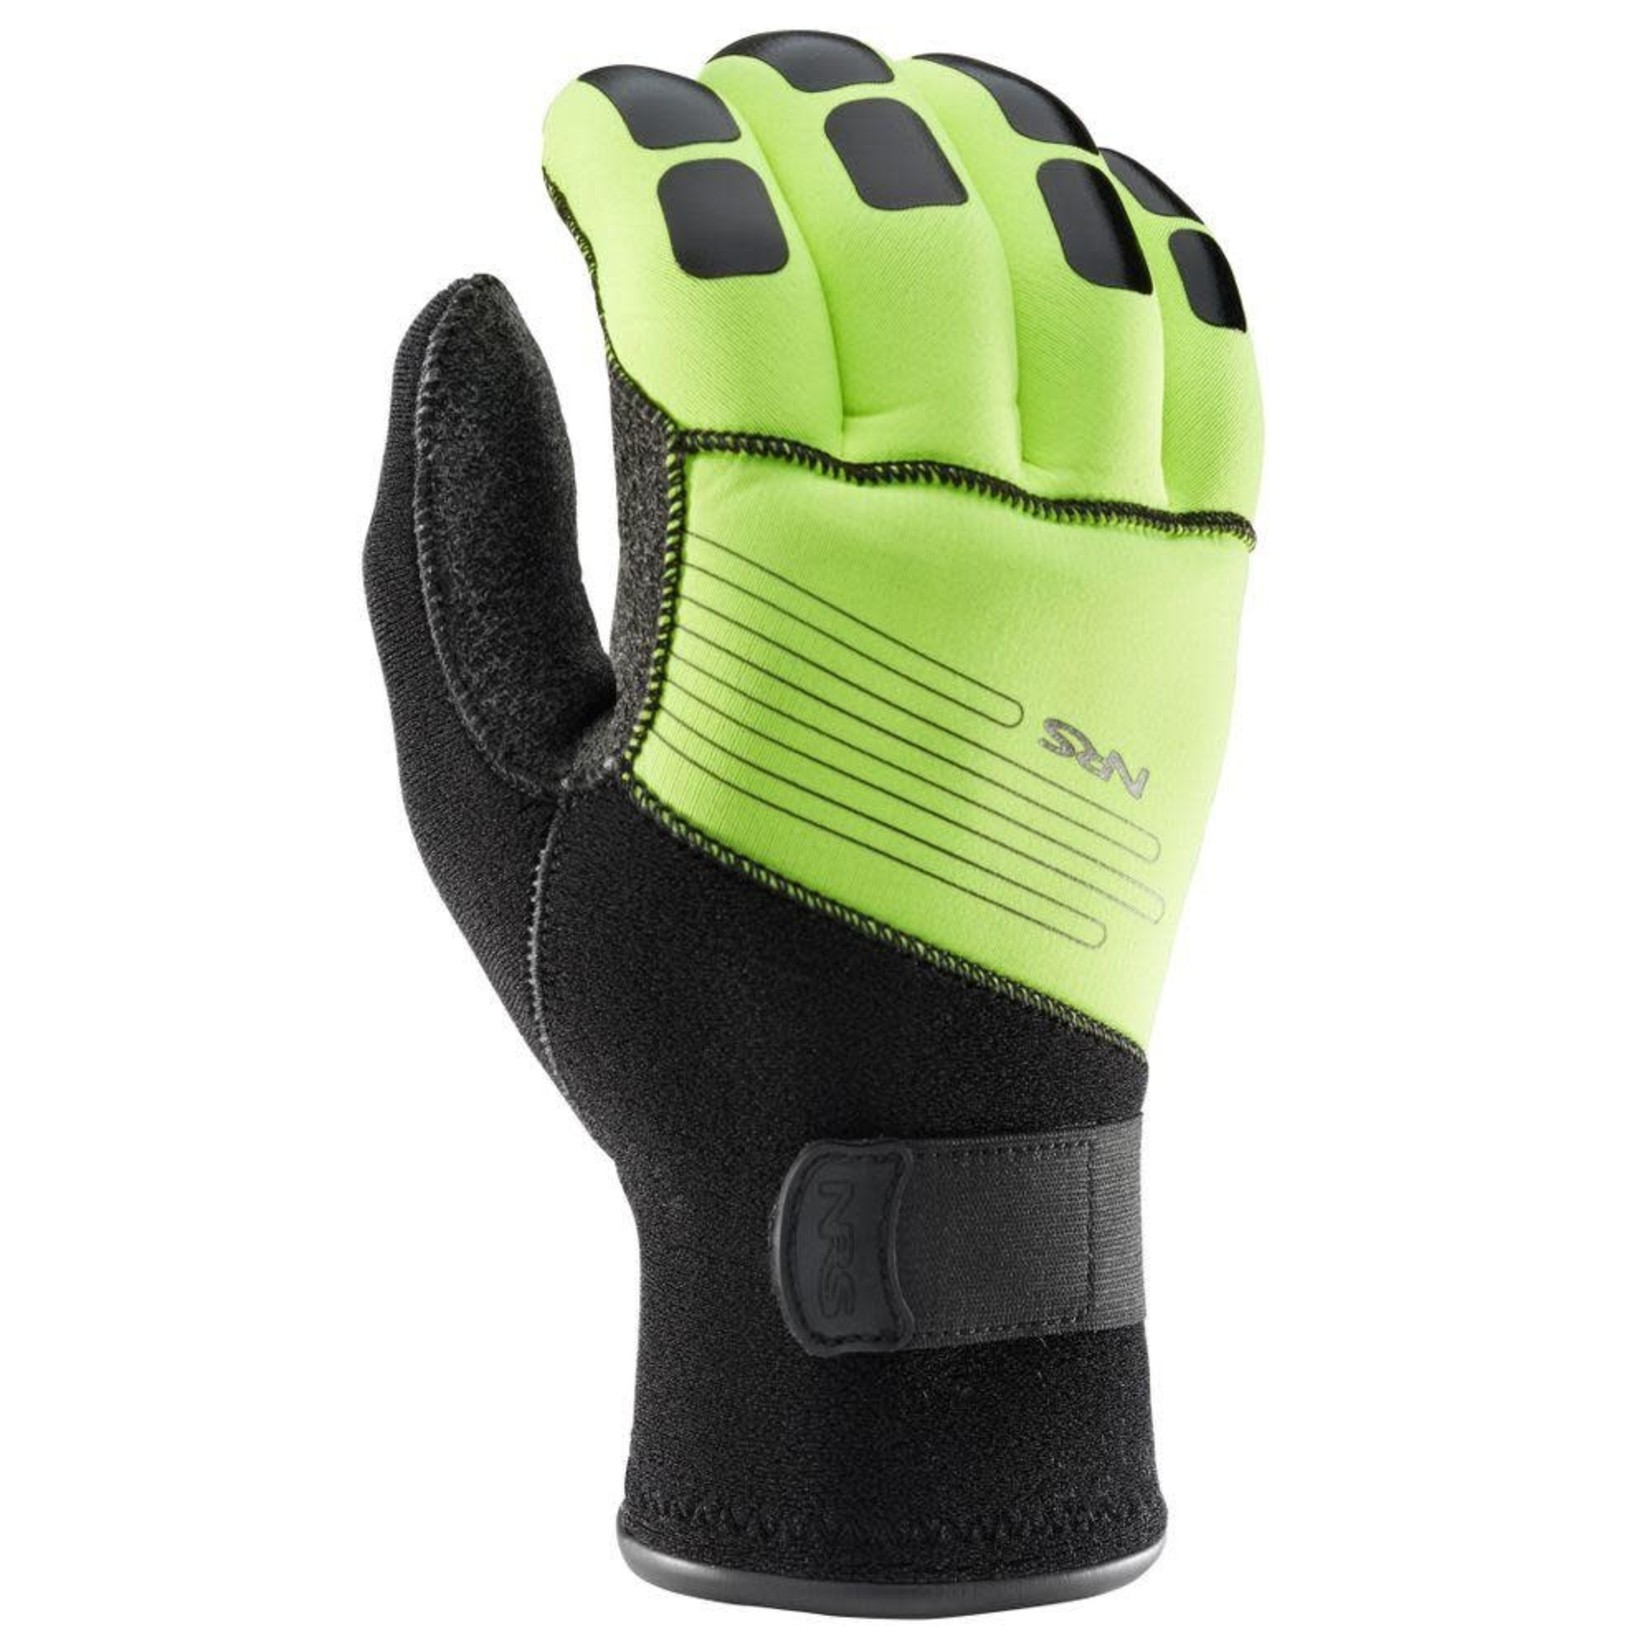 NRS NRS Reactor Rescue Gloves